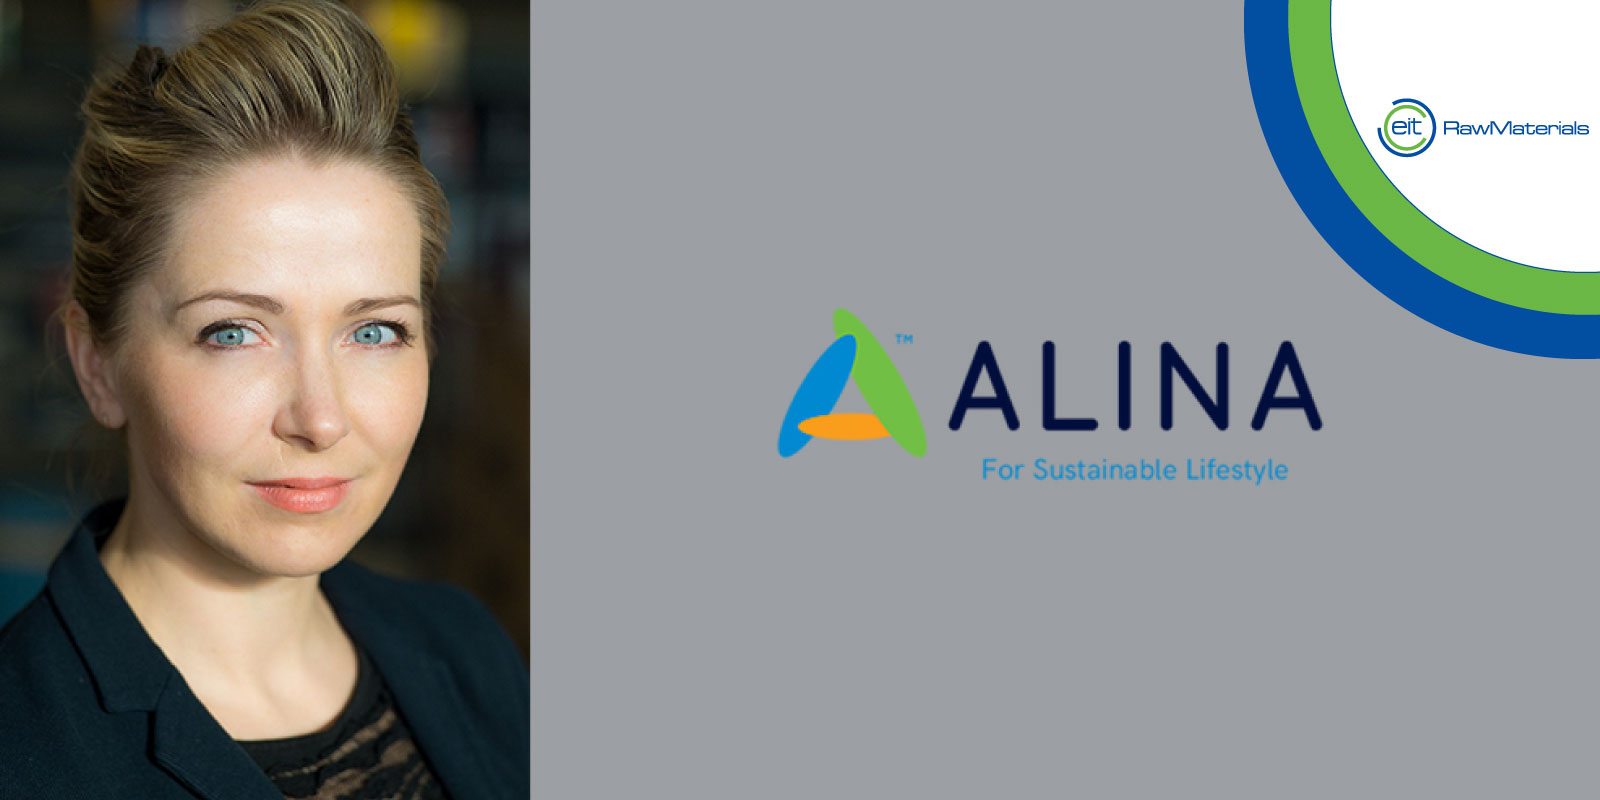 ALINA, start-up supported by EIT RawMaterials, raises EUR 550,000 investment from angel investors